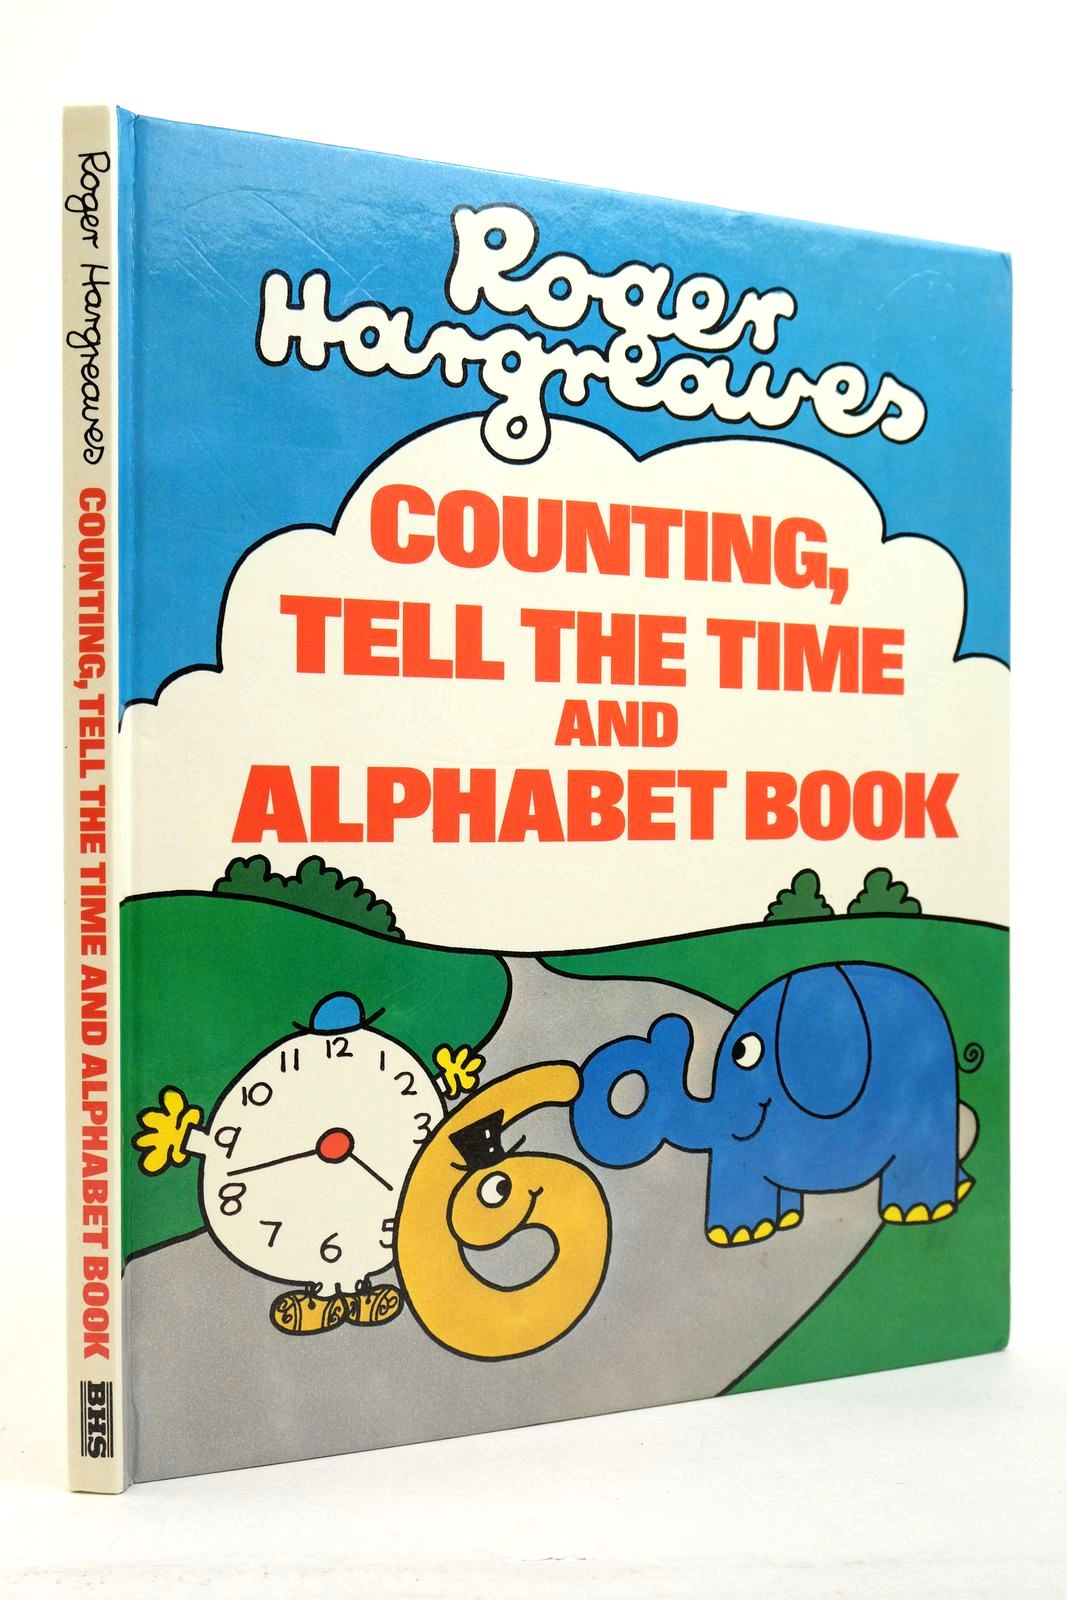 Photo of COUNTING, TELL THE TIME AND ALPHABET BOOK written by Hargreaves, Roger illustrated by Hargreaves, Roger published by BHS (STOCK CODE: 2140560)  for sale by Stella & Rose's Books